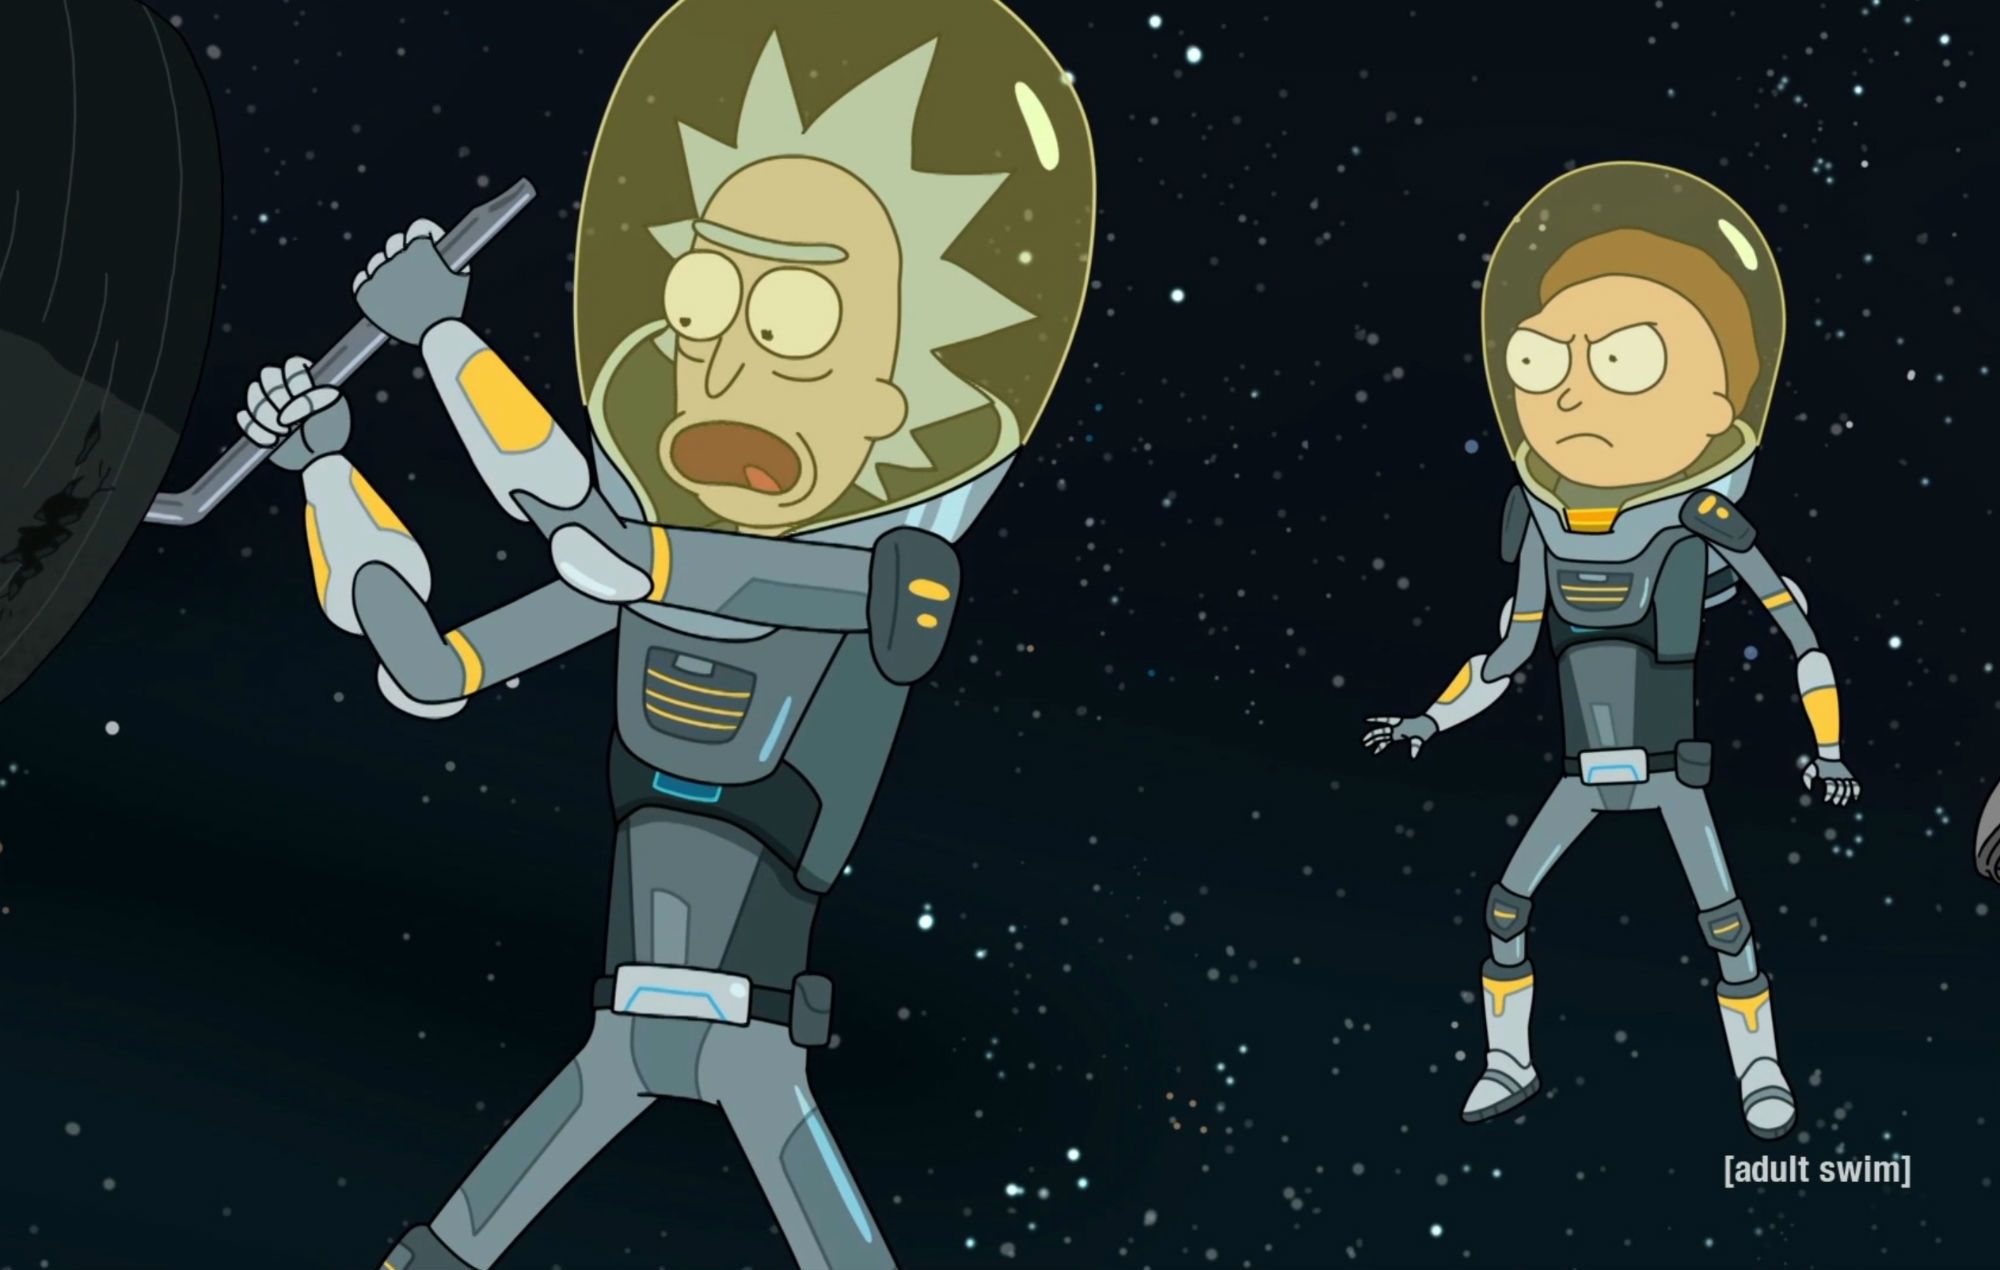 Rick And Morty Outer Space Wallpapers Wallpaper Cave